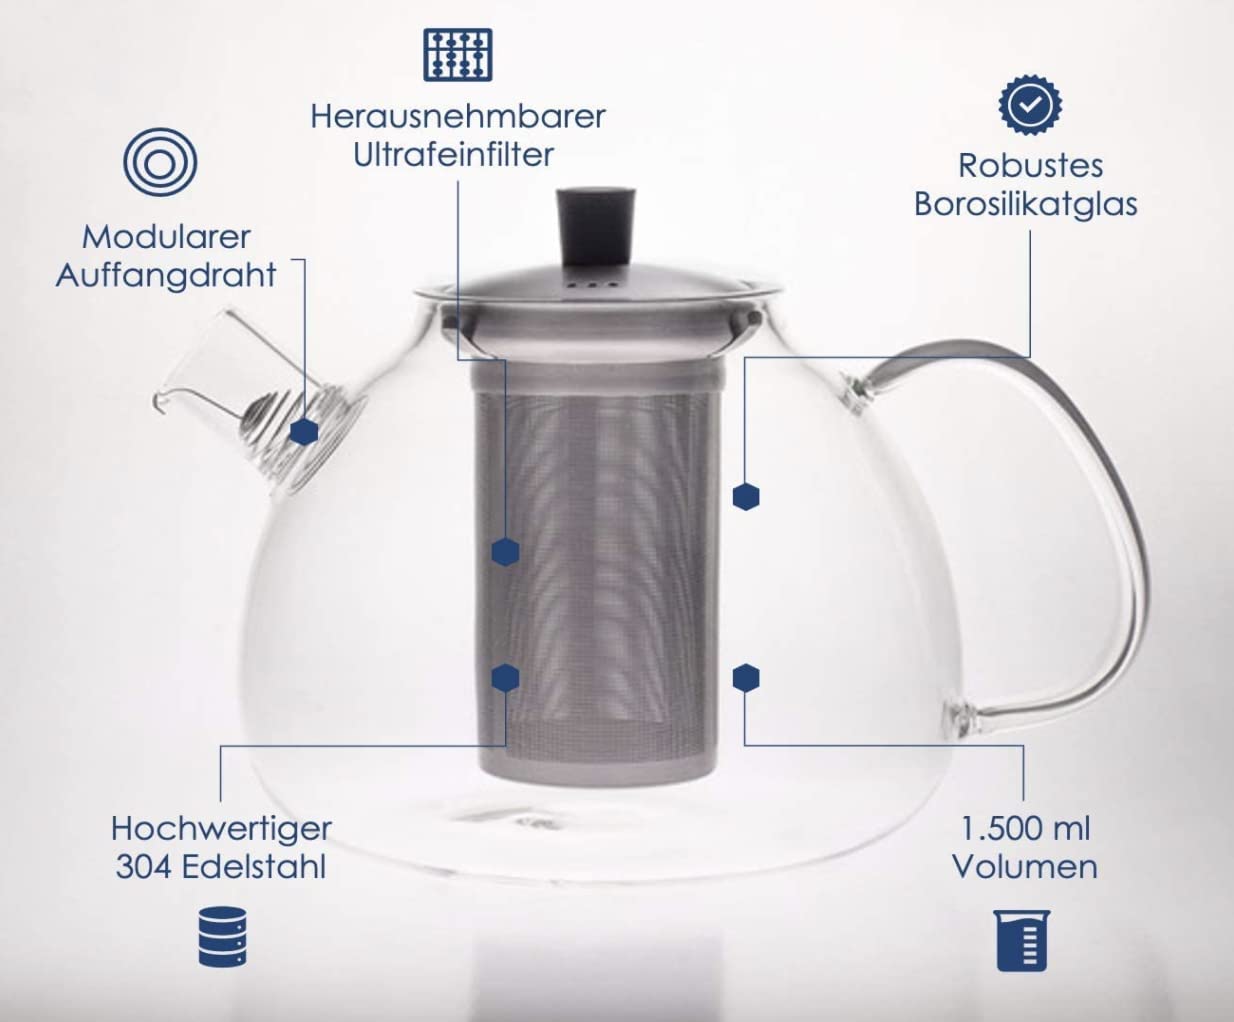 Hanseküche Premium Teapot 1500 ml Glass Tea Maker – Very Heat Resistant Teapot, Glass Jug, Tea Maker Made of Borosilicate Glass – Removable and Removable Stainless Steel Strainer and Collection Wire